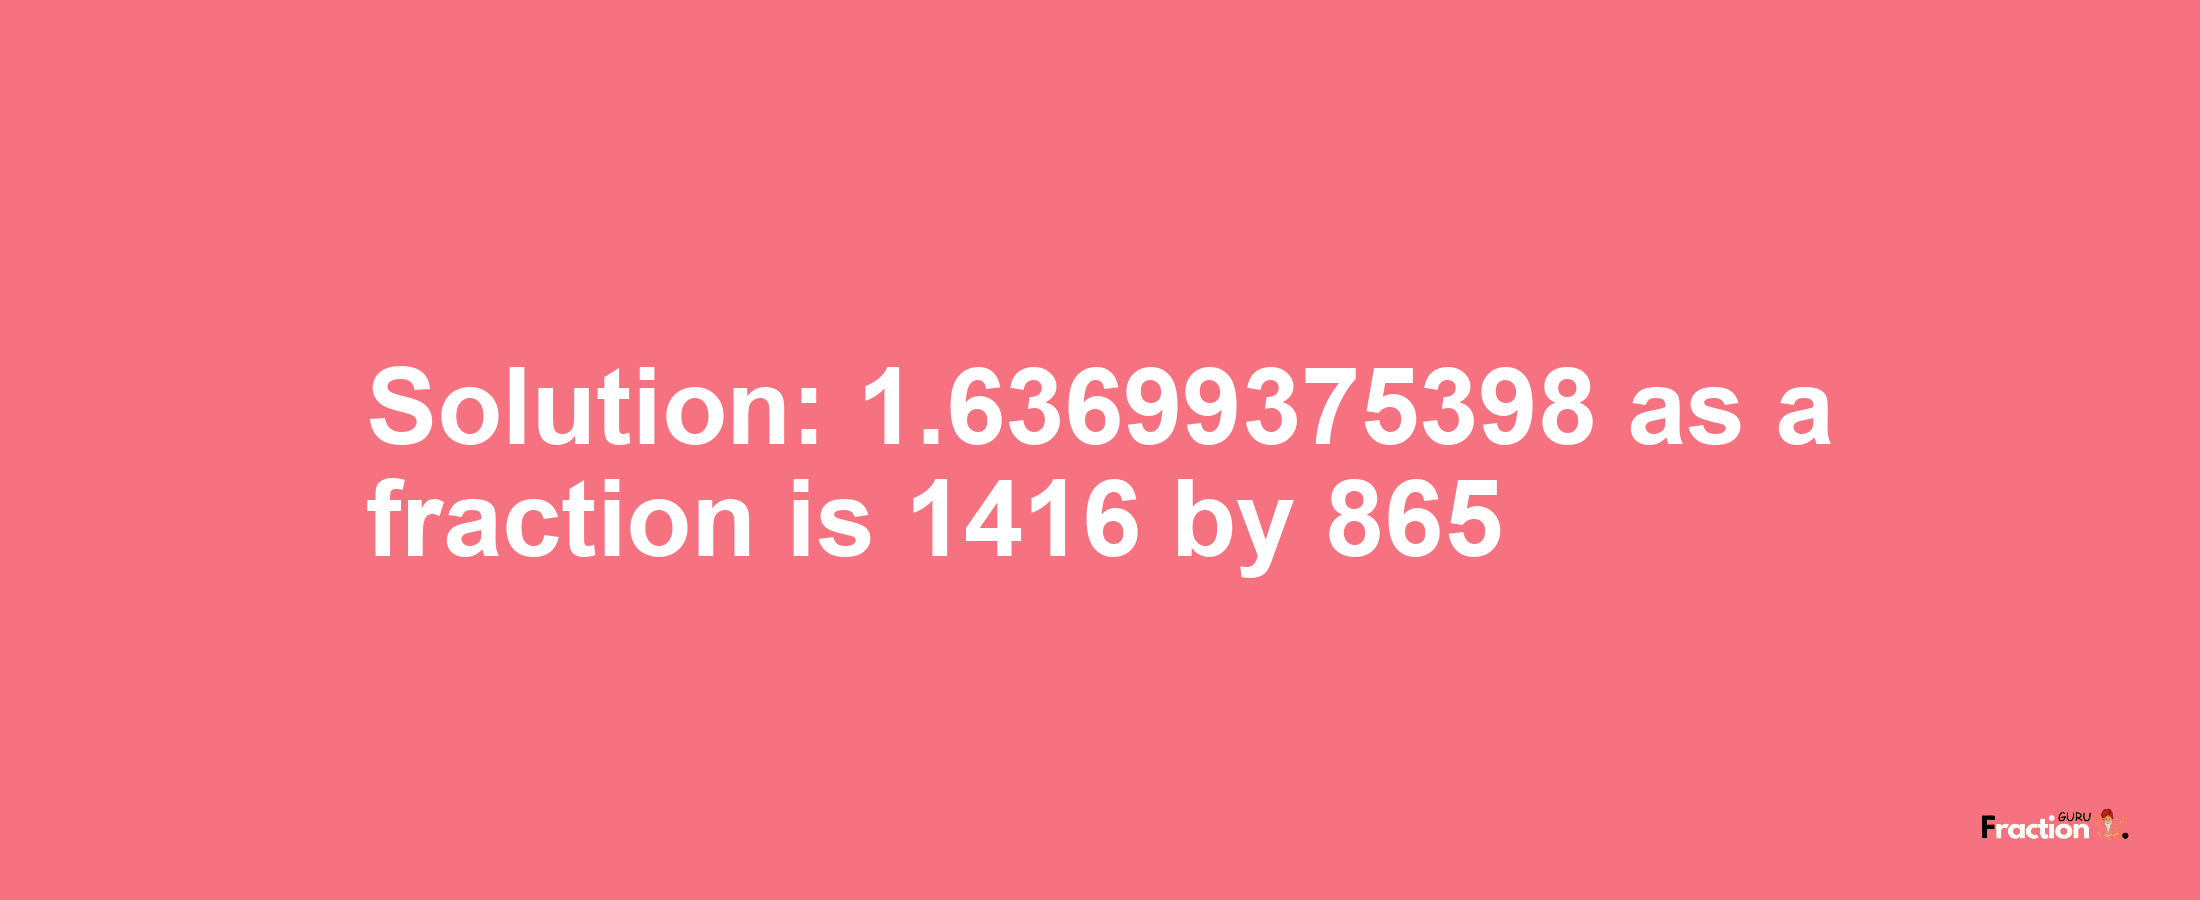 Solution:1.63699375398 as a fraction is 1416/865